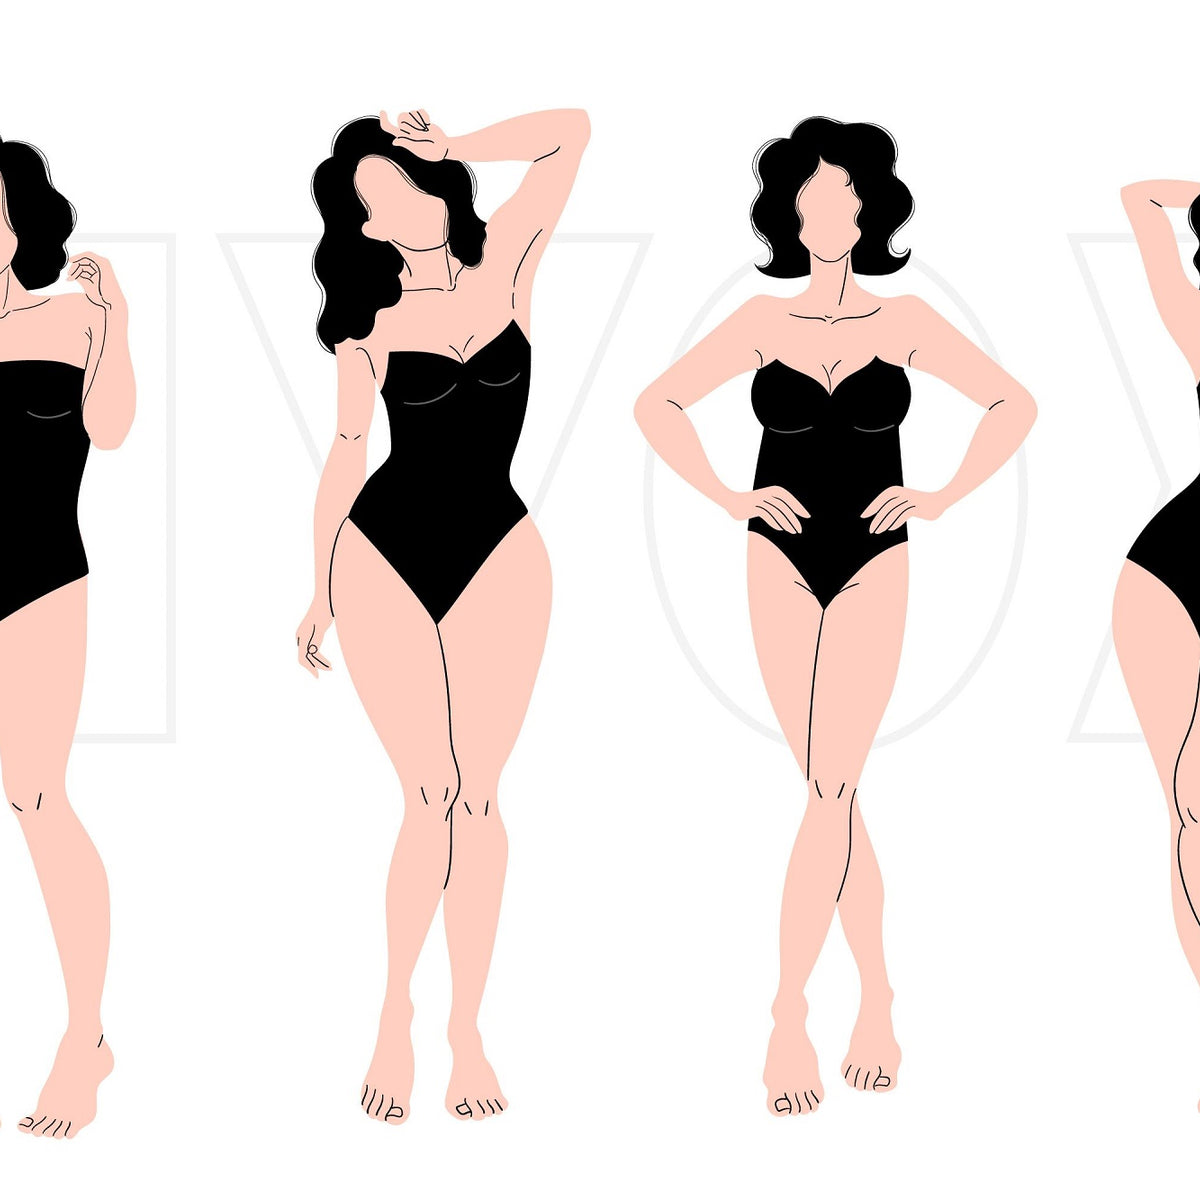 Skincare Secrets: Nurturing Your Skin While Using Shapewear - Snatched body